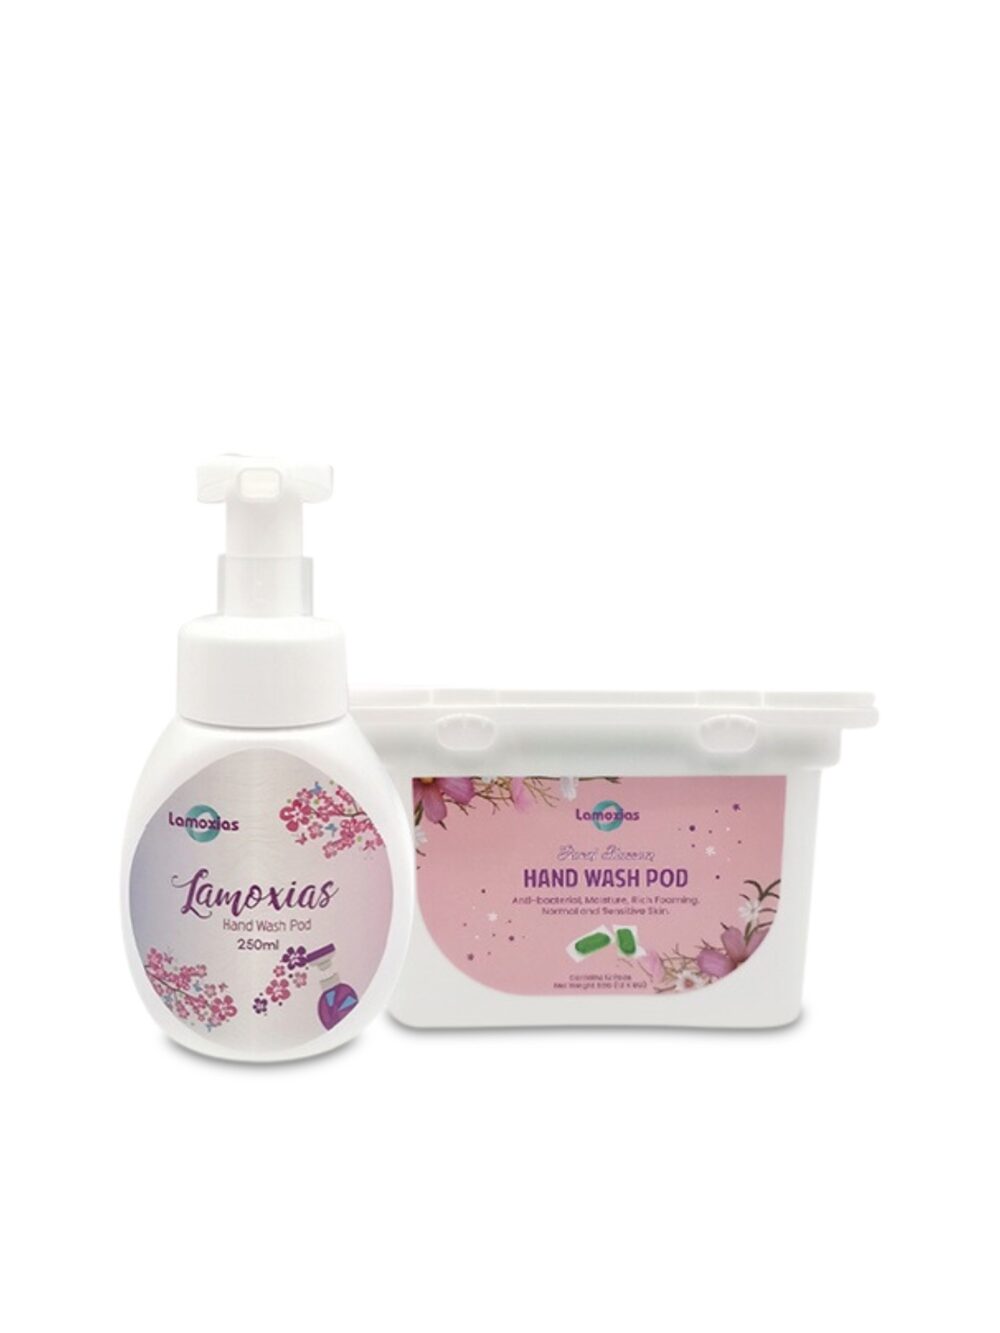 Floral blossom hand washing foam that uses lamoxias pods to dissolve in water, easier to store and use.